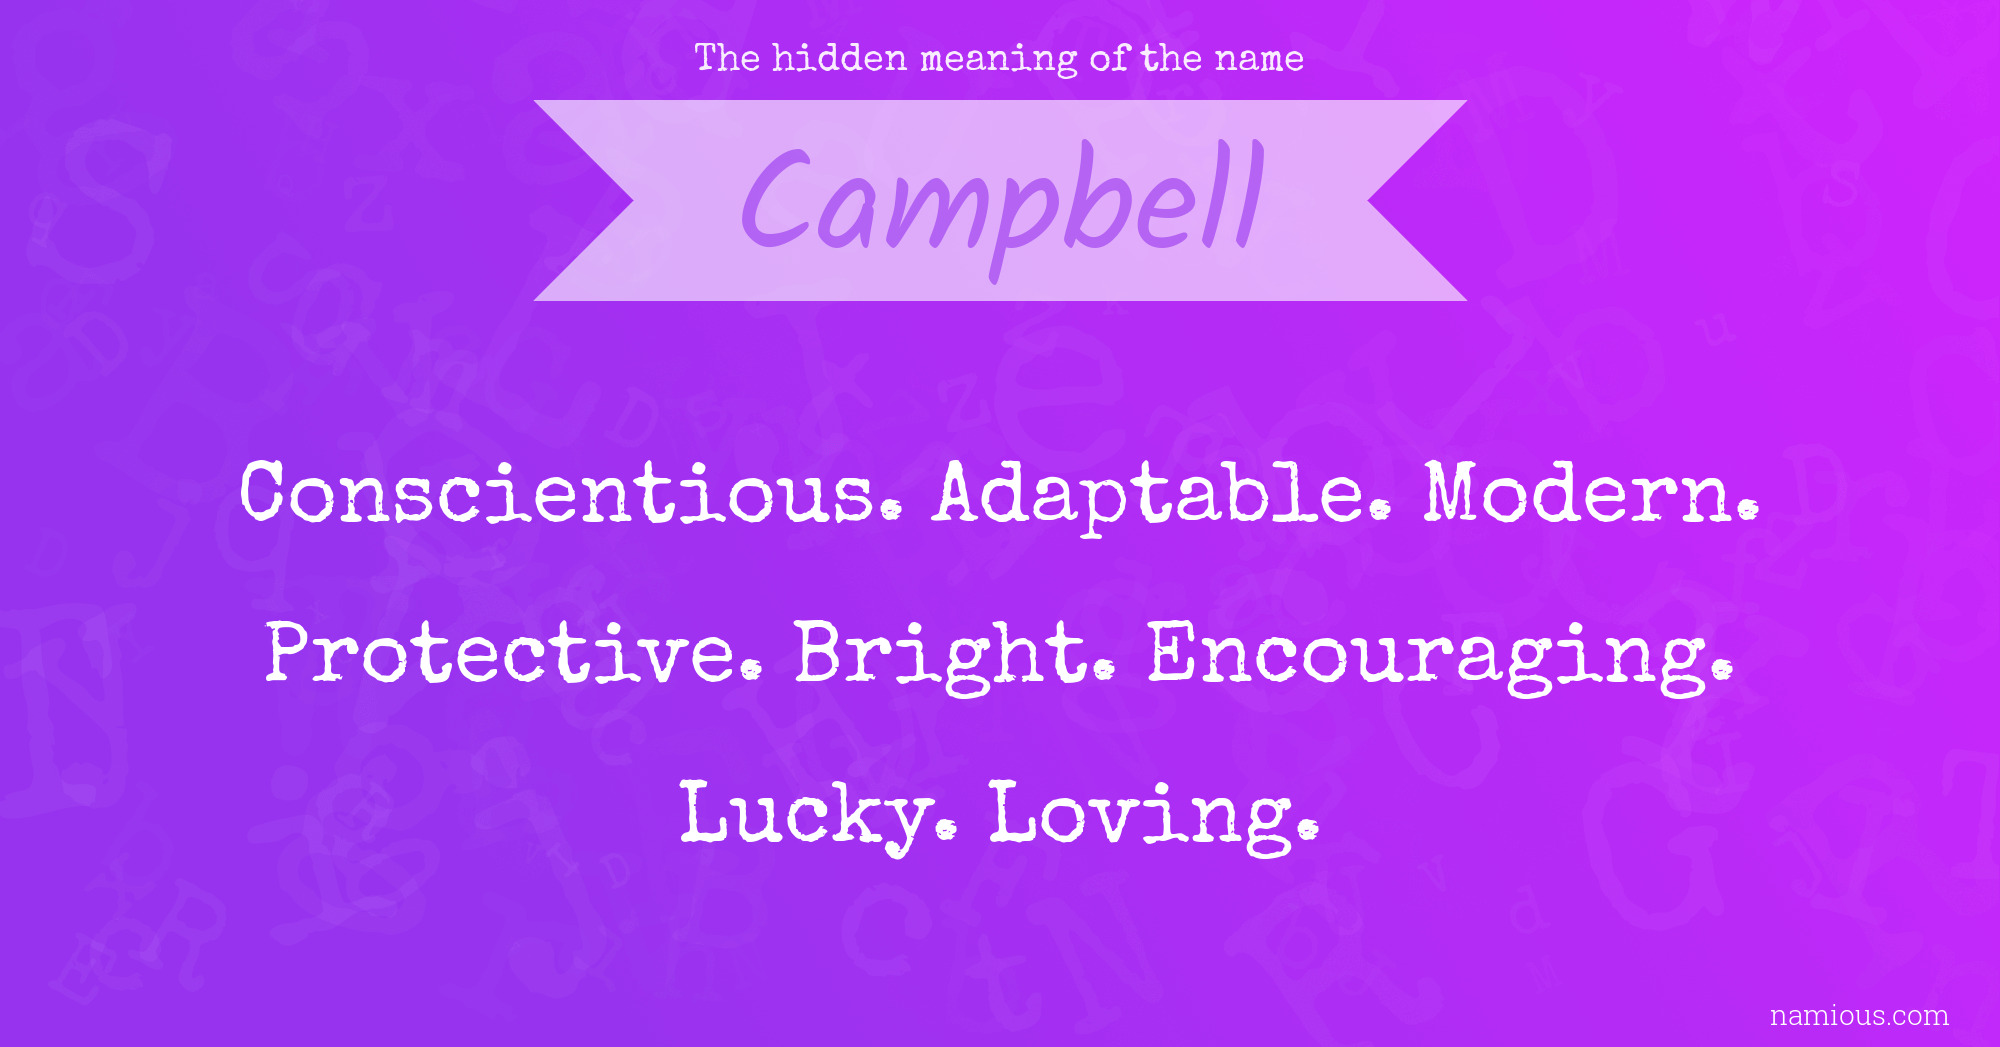 The hidden meaning of the name Campbell